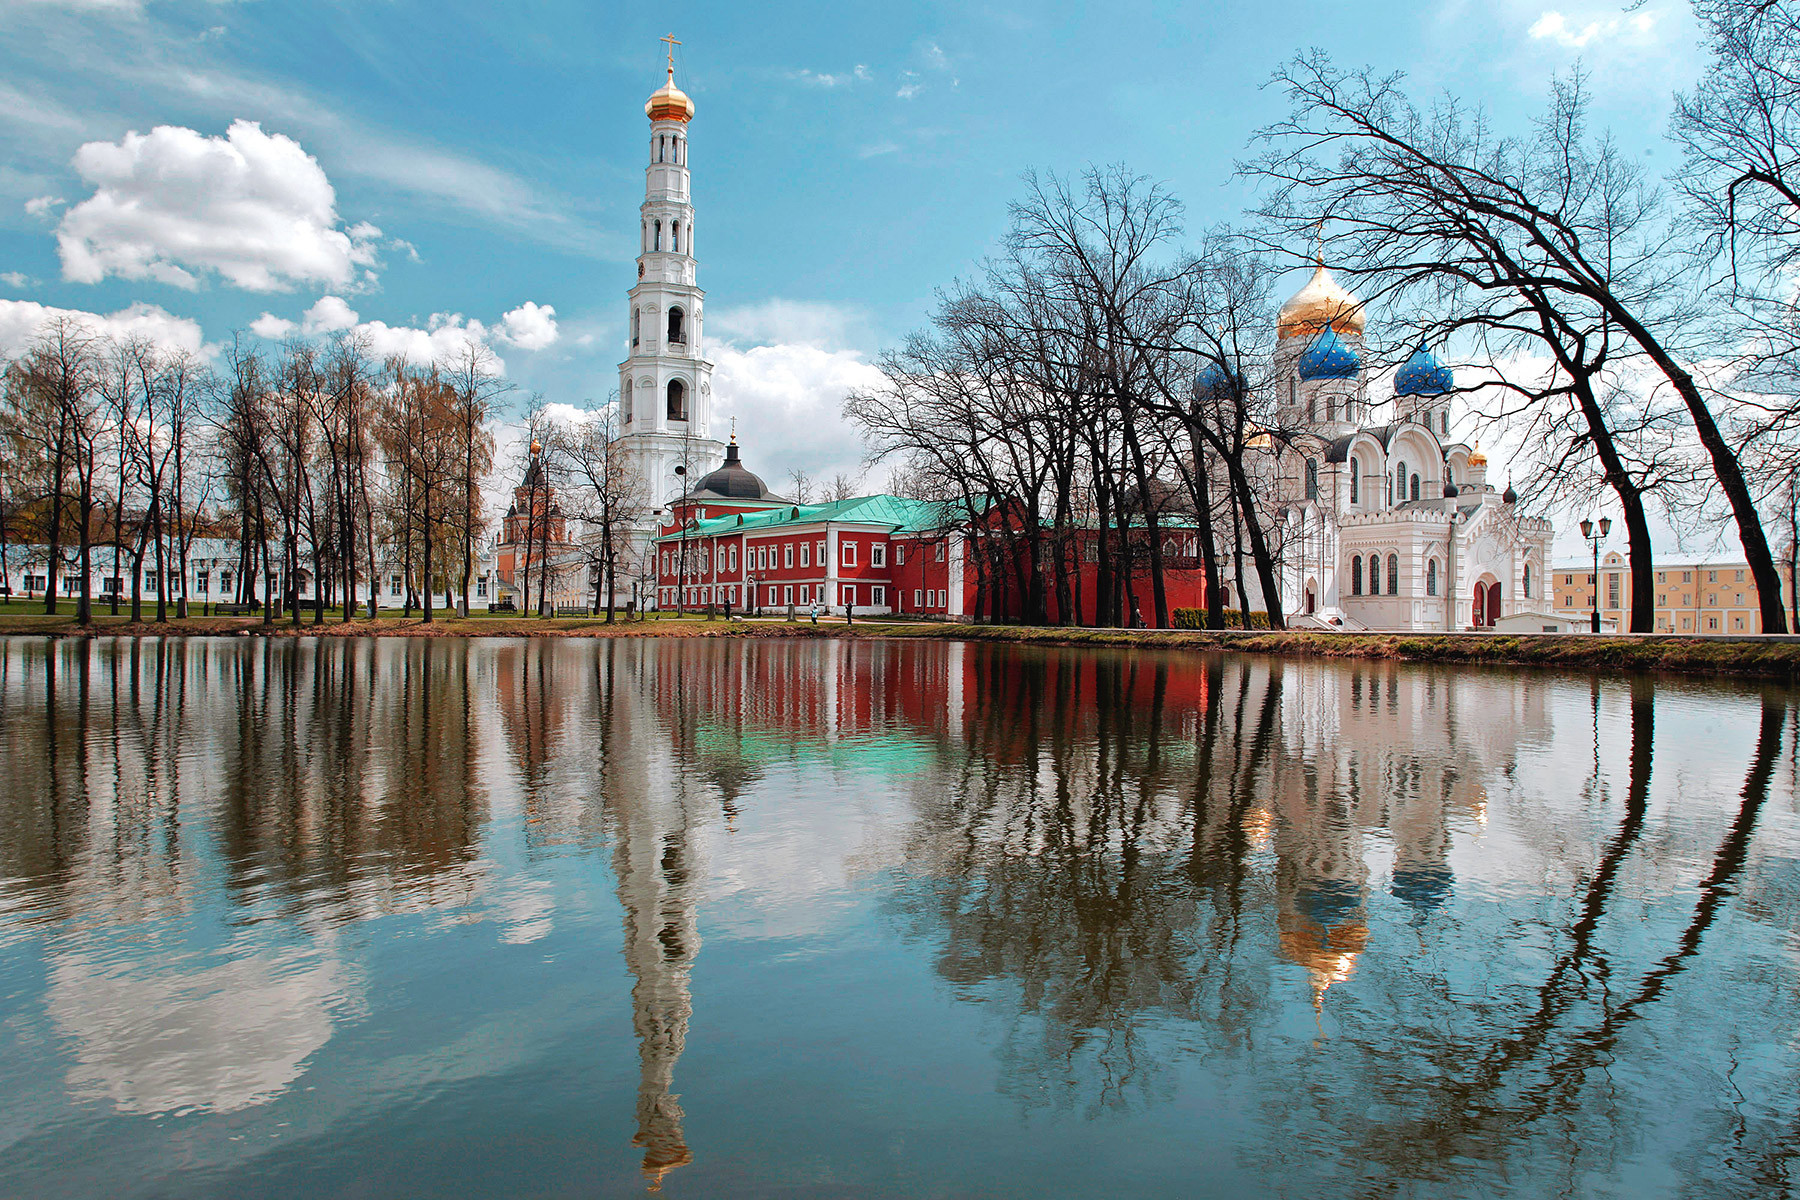 Ugresha Monastery was founded in 1380 by Moscow Prince Dmitry Donskoy 